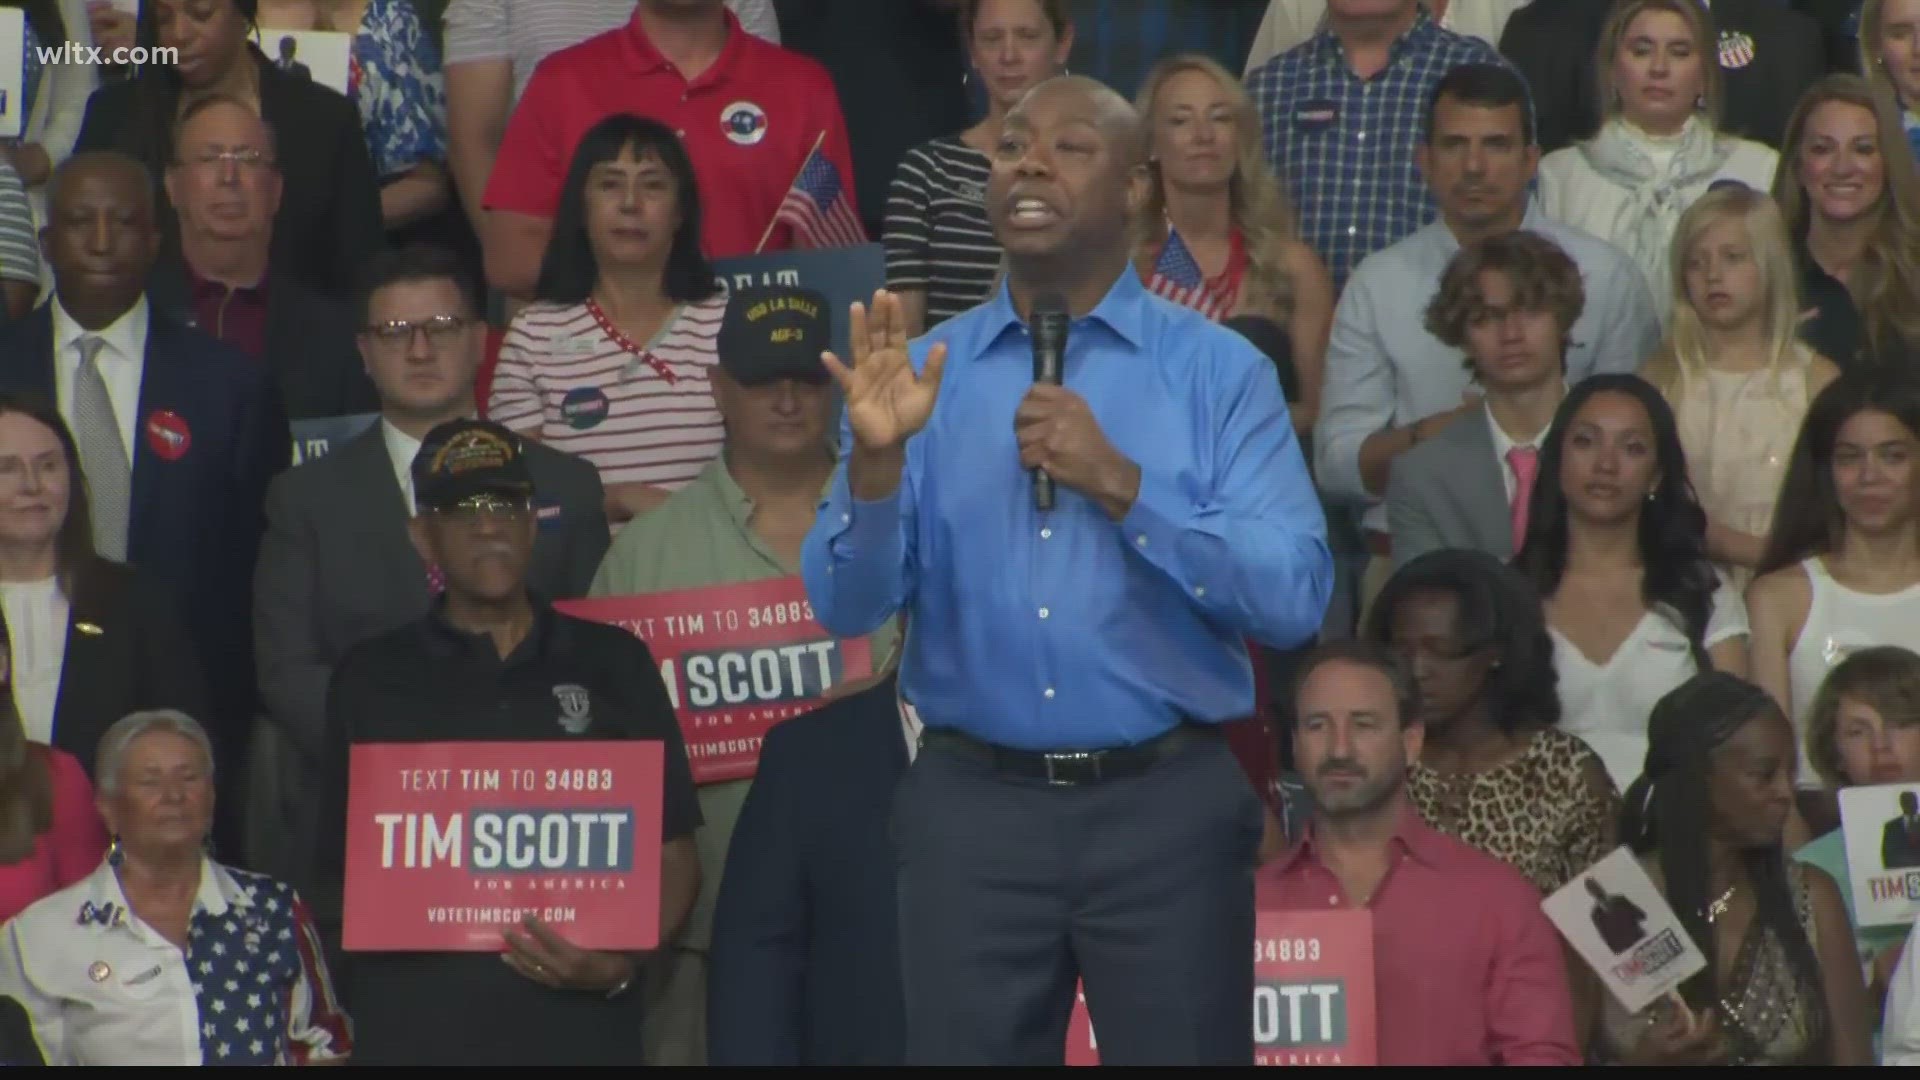 South Carolina Sen. Tim Scott has launched his presidential campaign. At an event in his hometown of North Charleston on Monday, Scott offered an optimistic message.